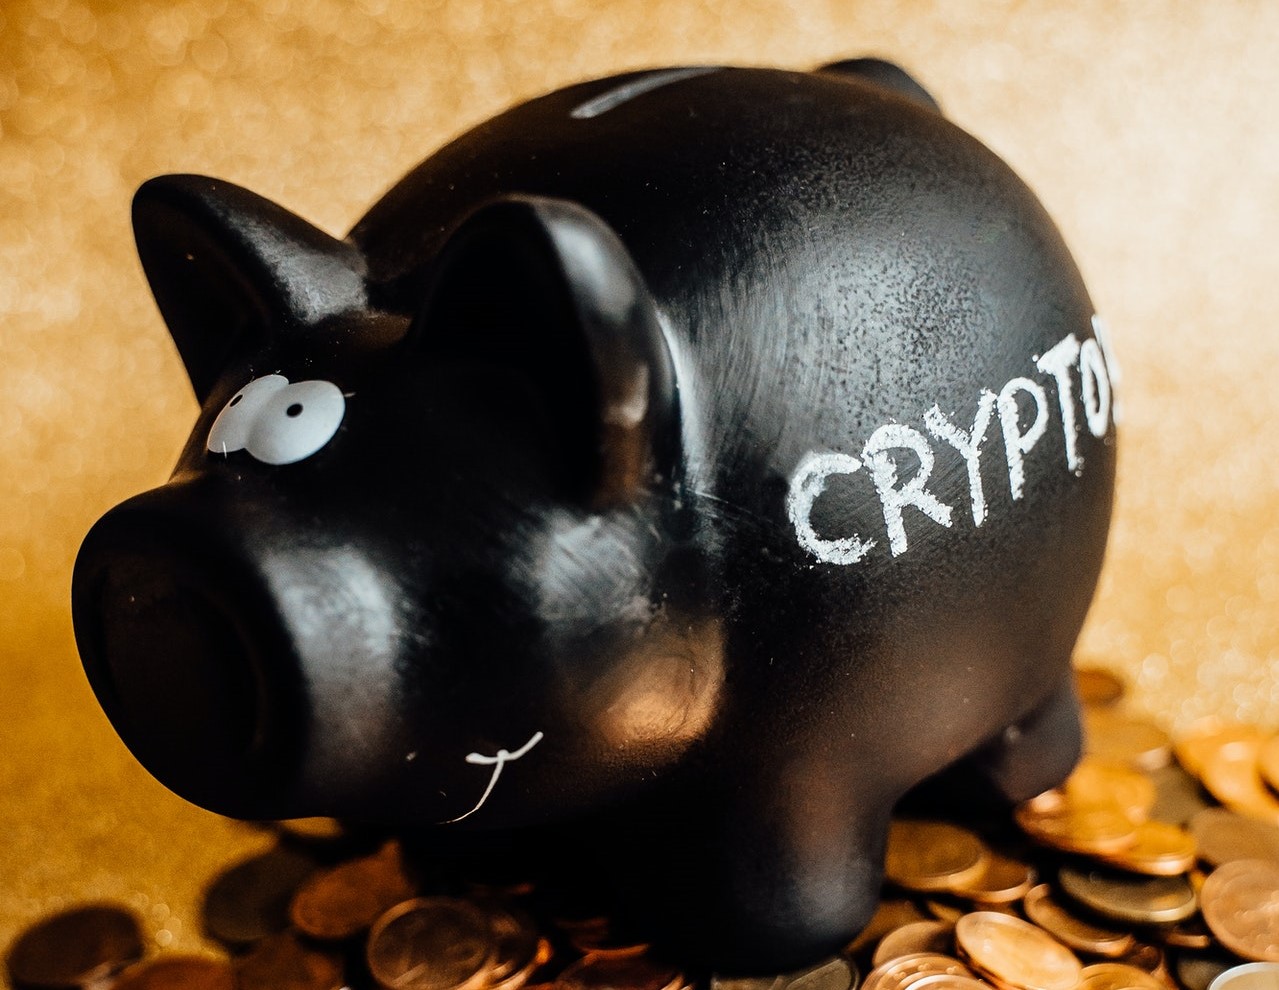 Cryptocurrency is the dark side of the piggy bank.